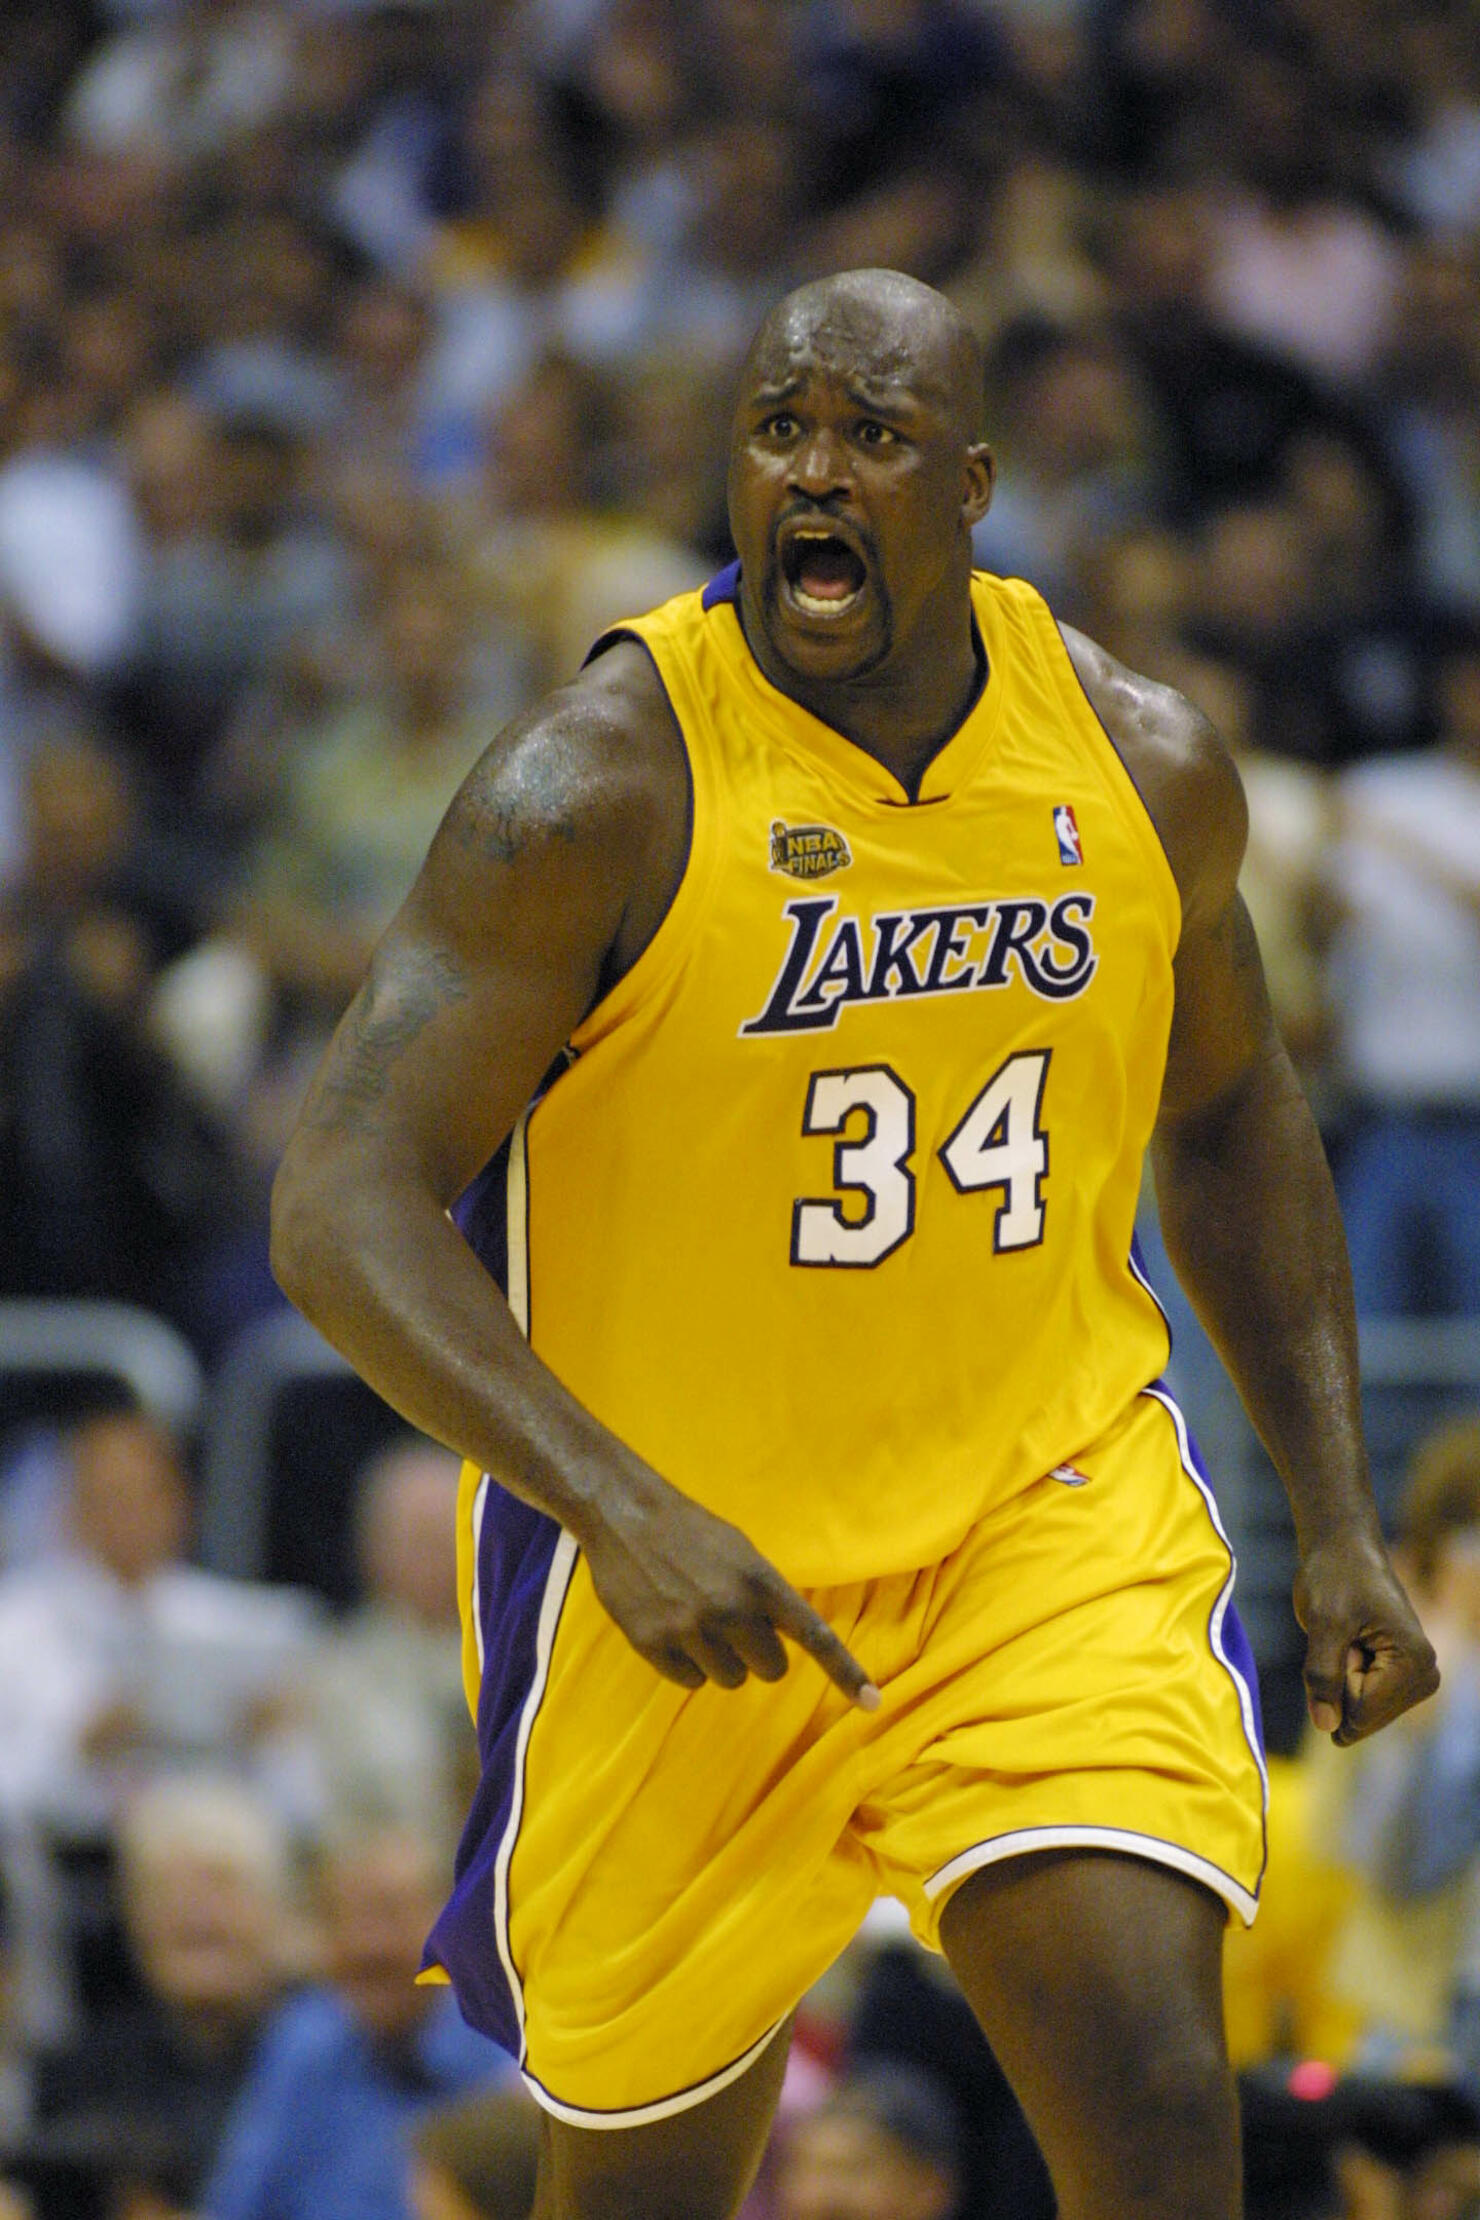 PHOTOS: Shaq through the years with the Lakers